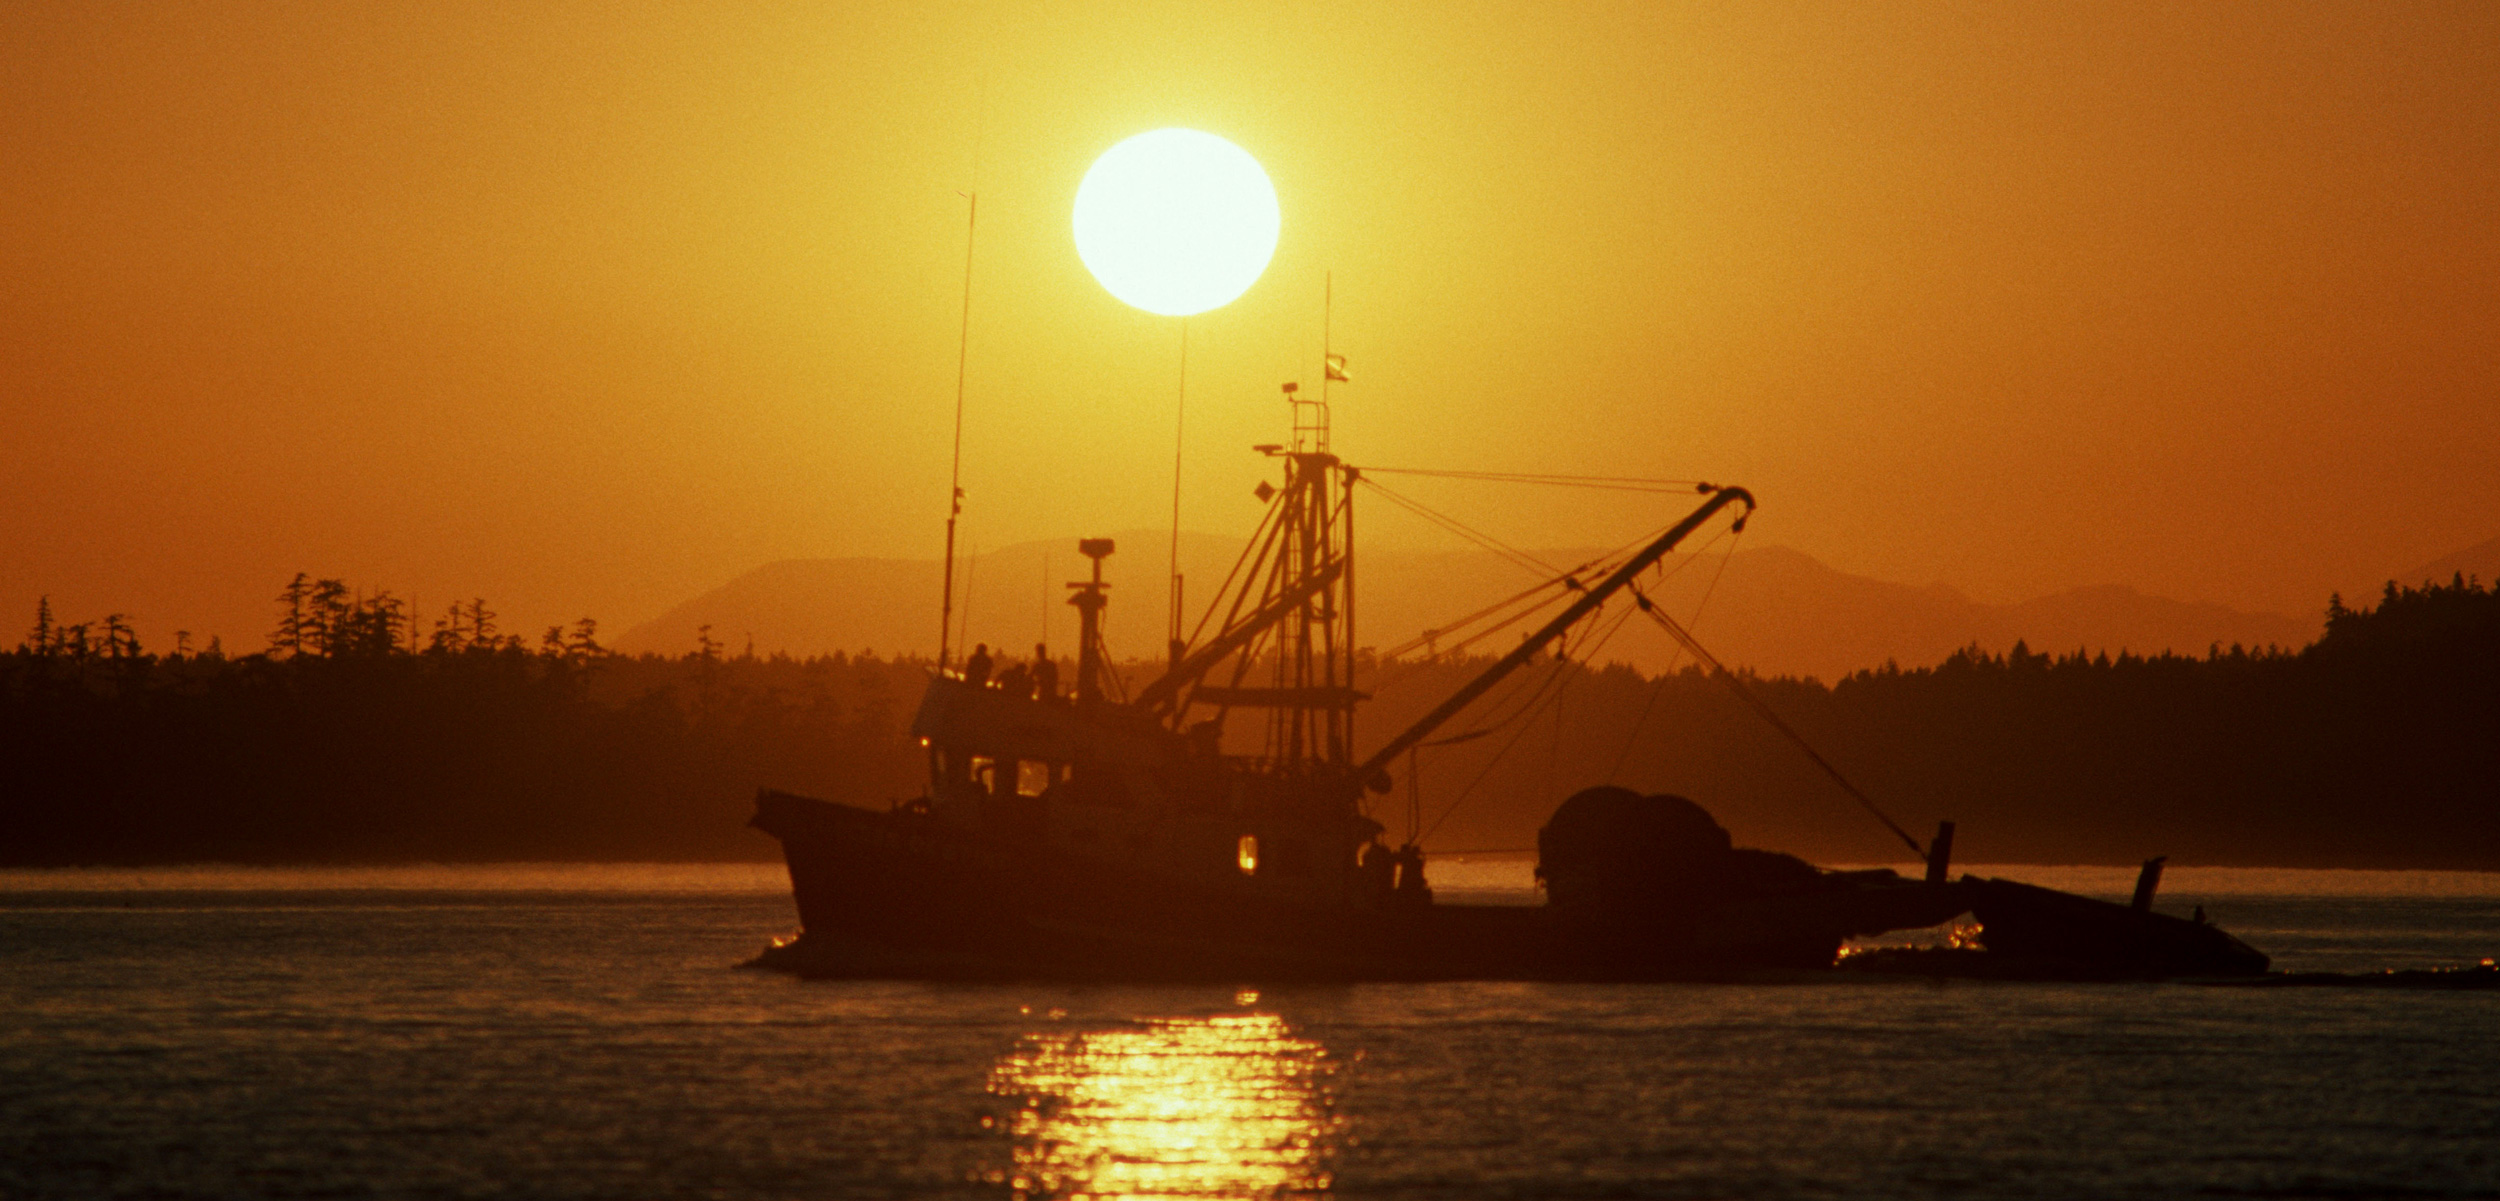 Vancouver Island commercial fishboat in sunset, British Columbia, Canada